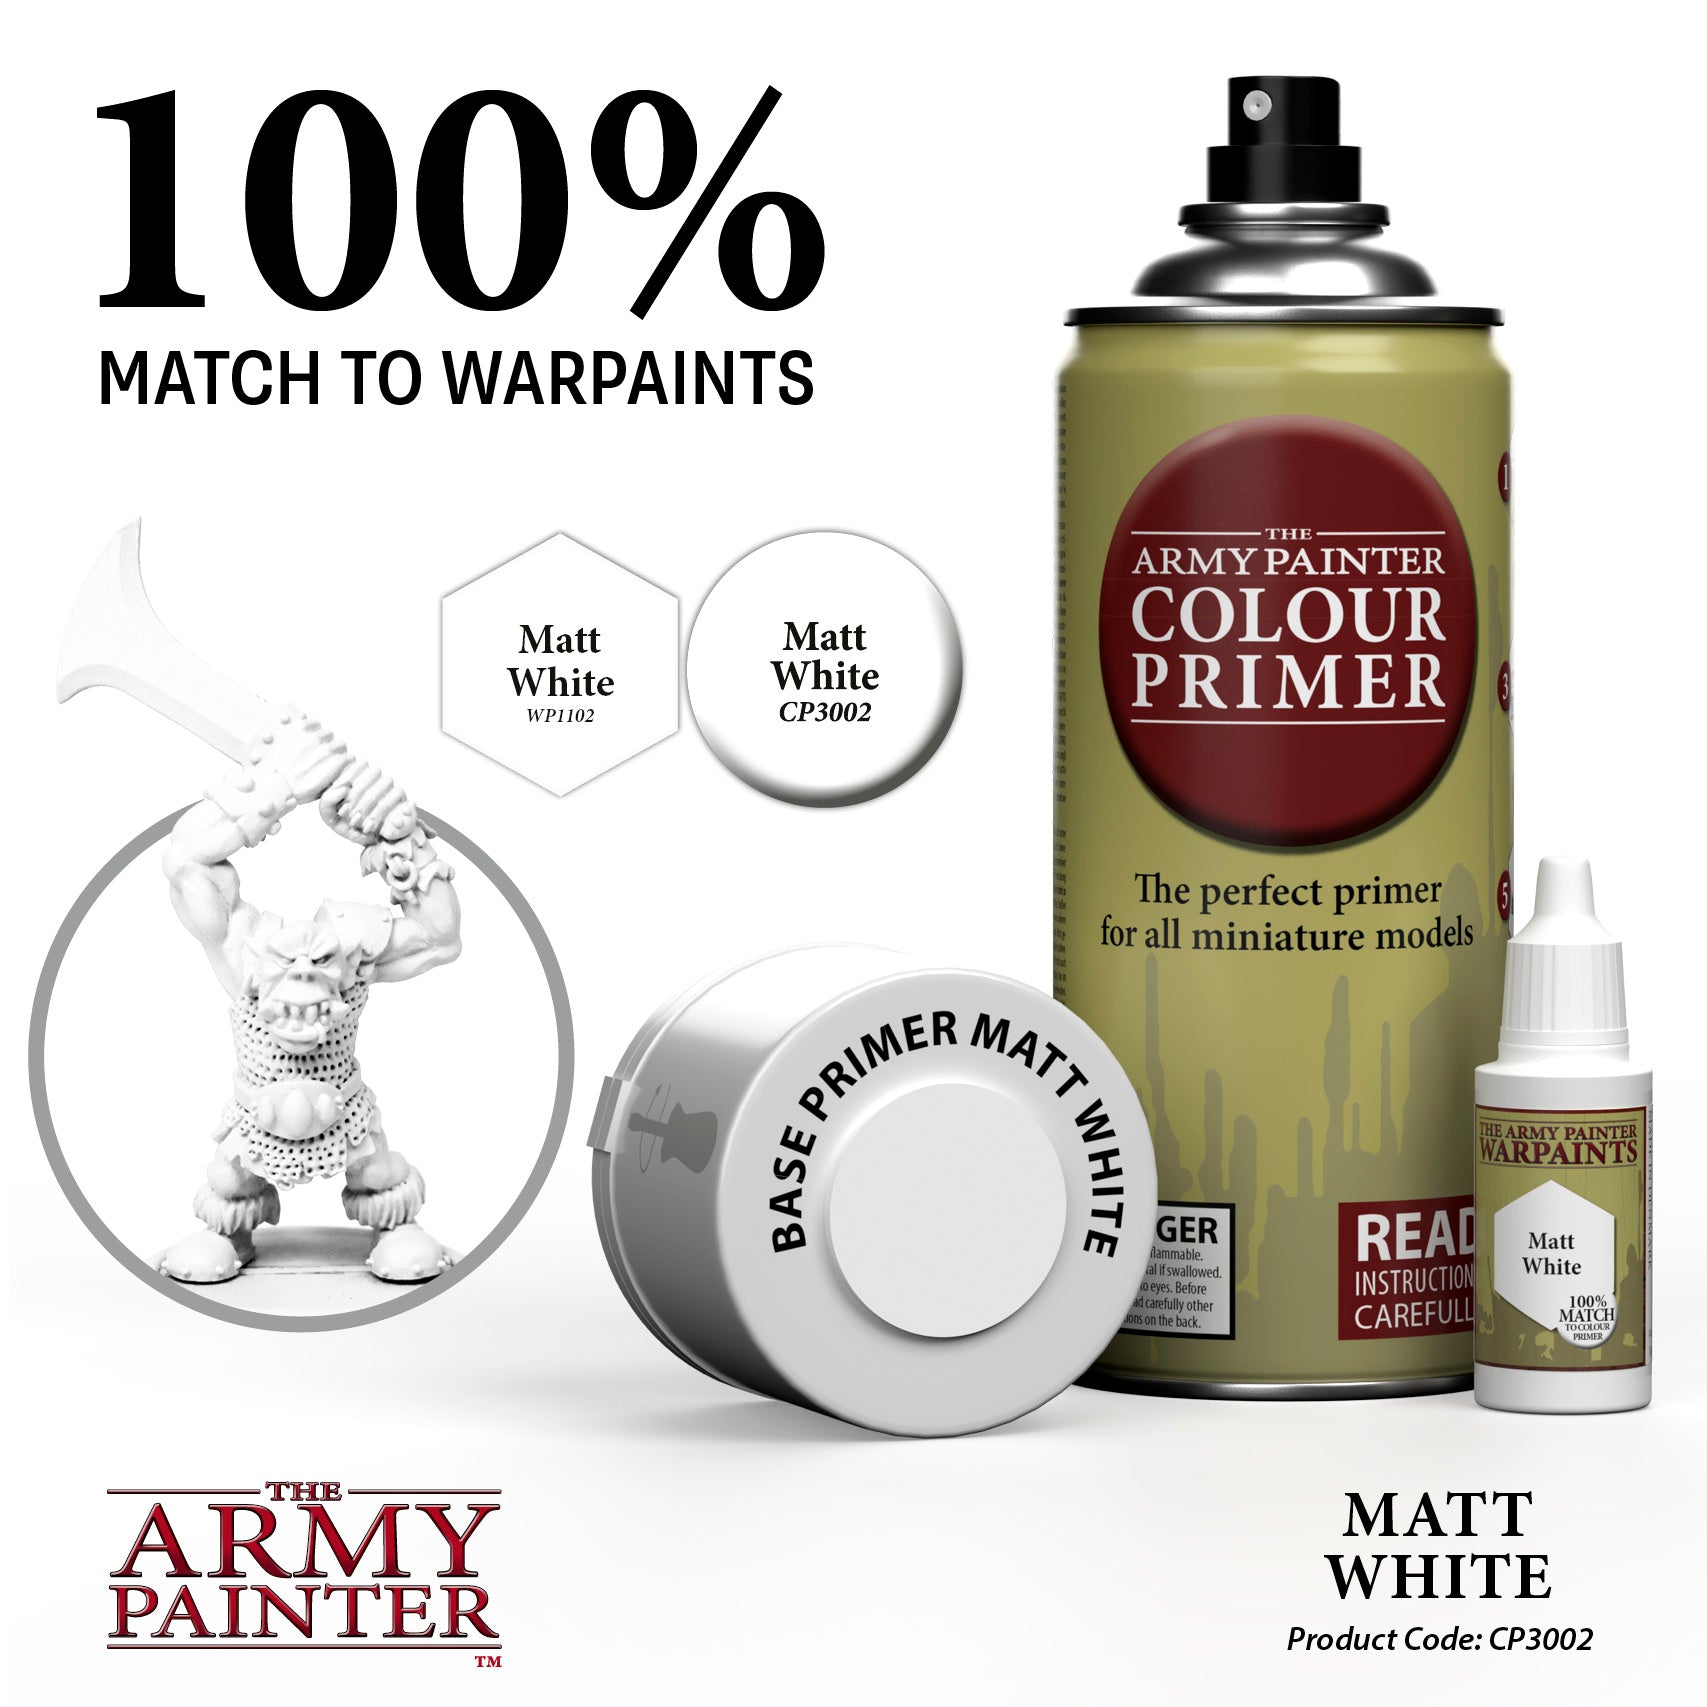 Can anyone recommend a better white? Both army Painter and